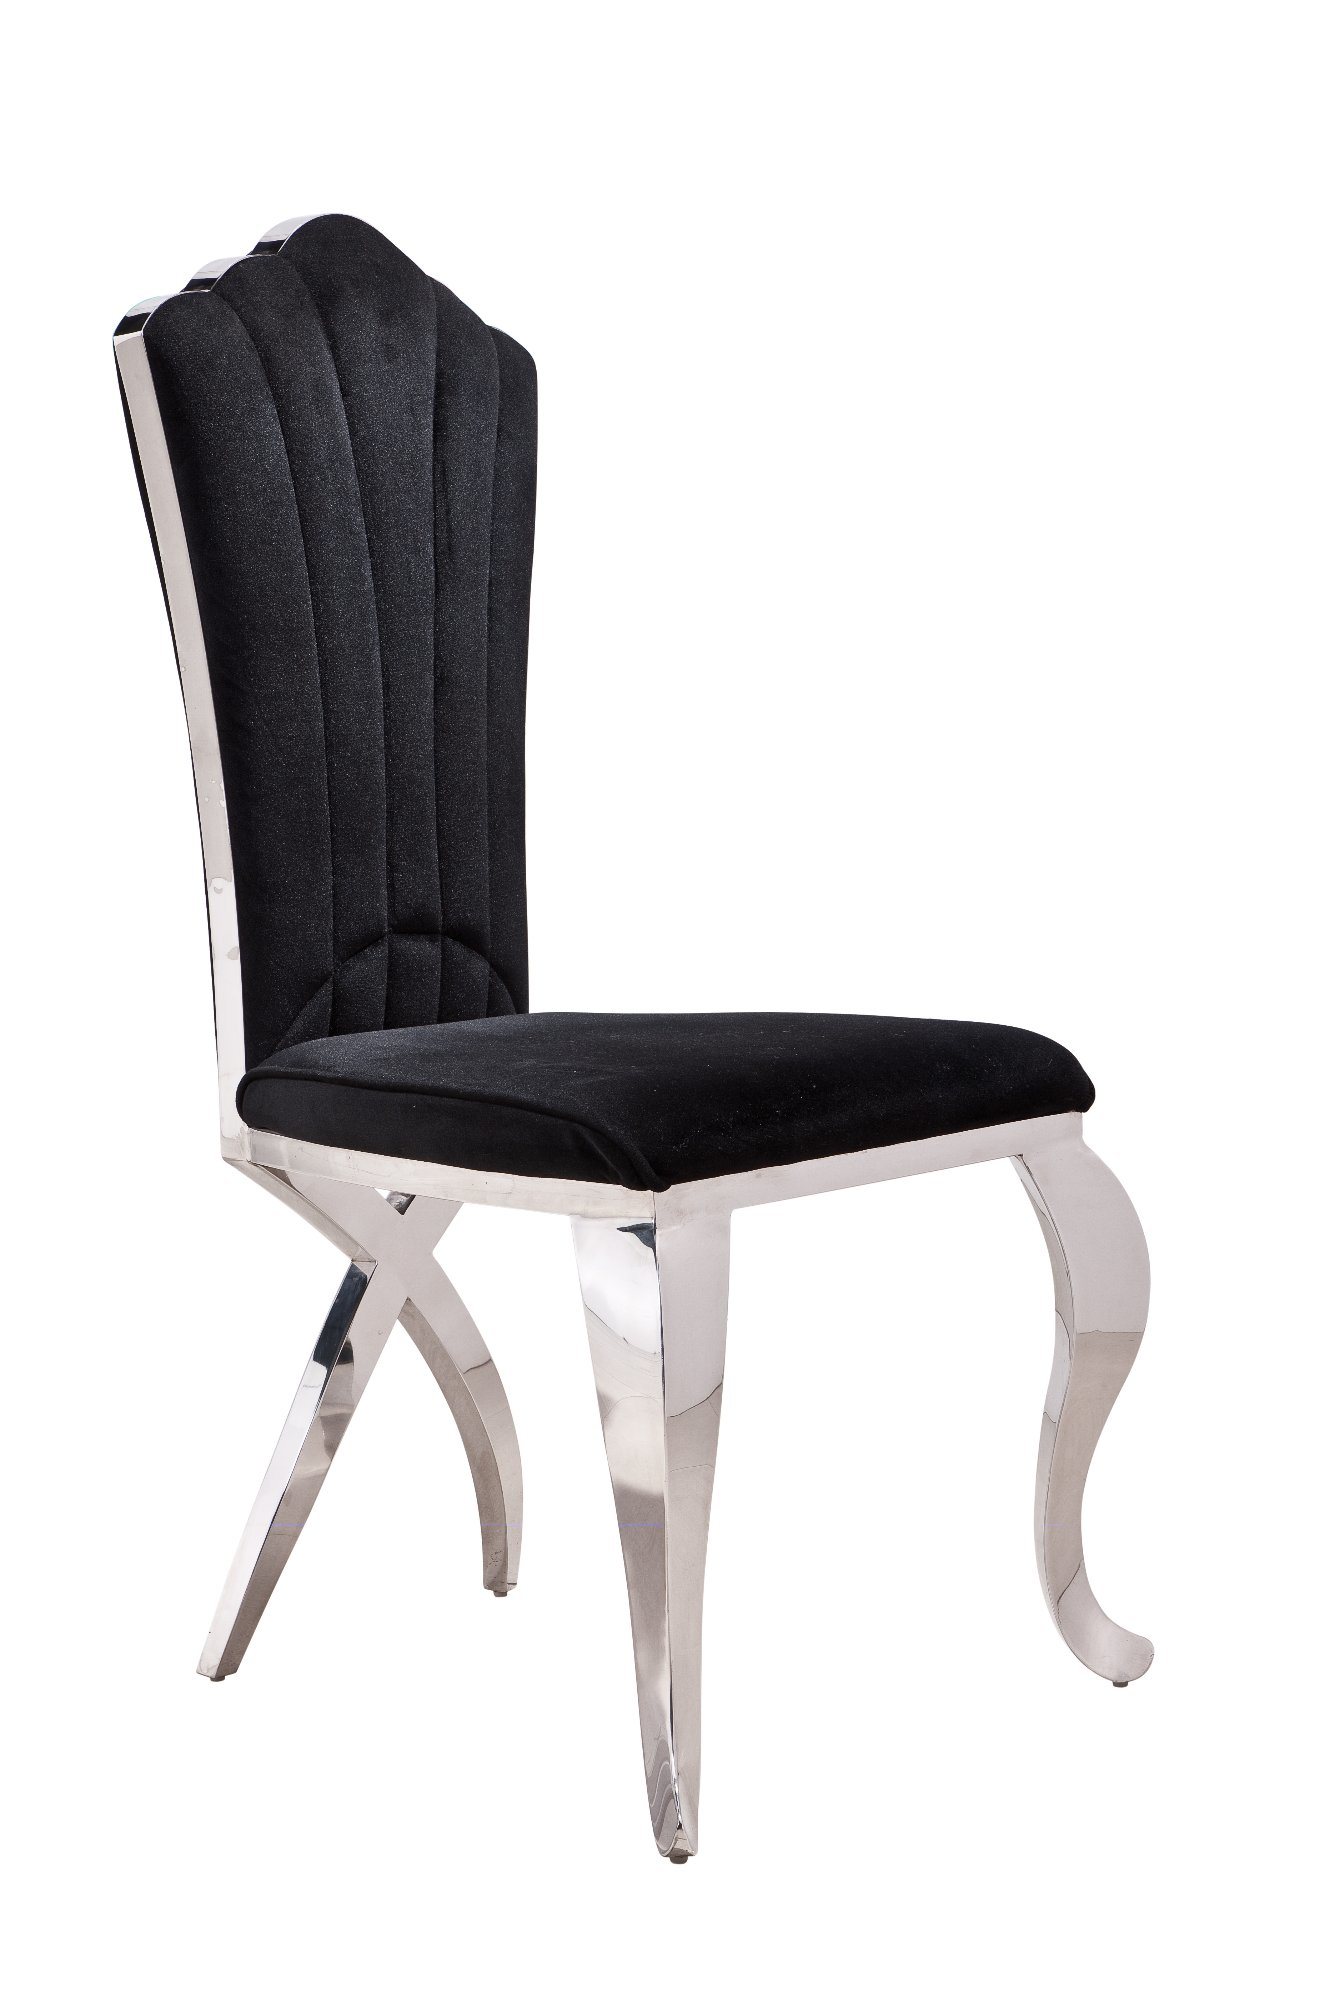 Popular Stainless Steel Leather Dining Chairs